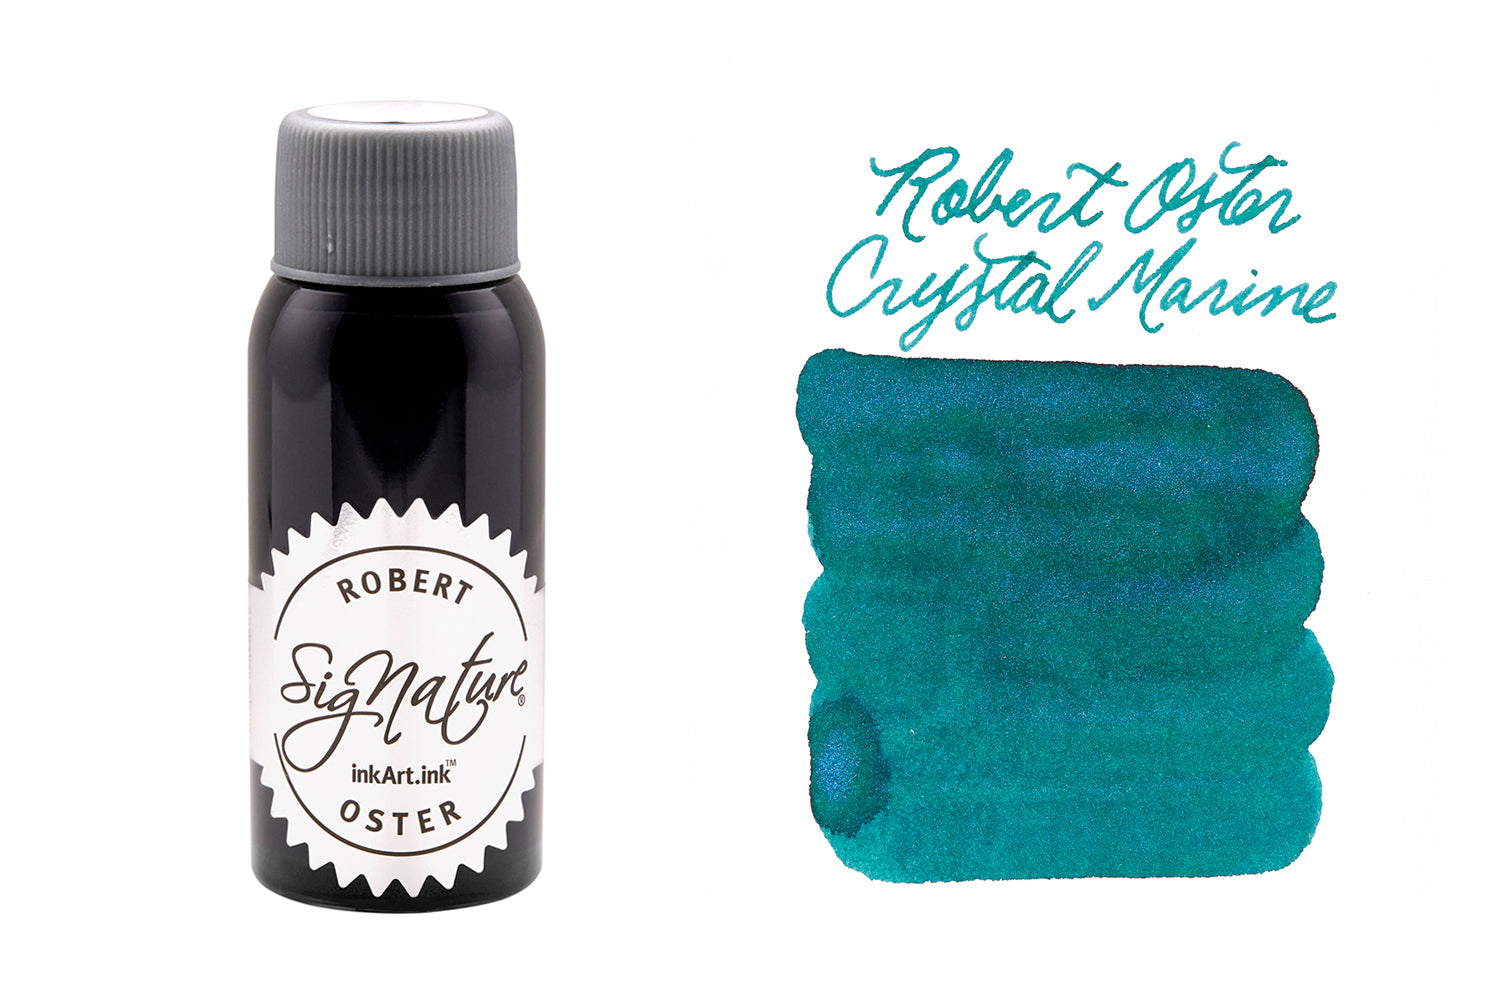 Robert Oster Fountain Pen ink bottle and 1 white swab card